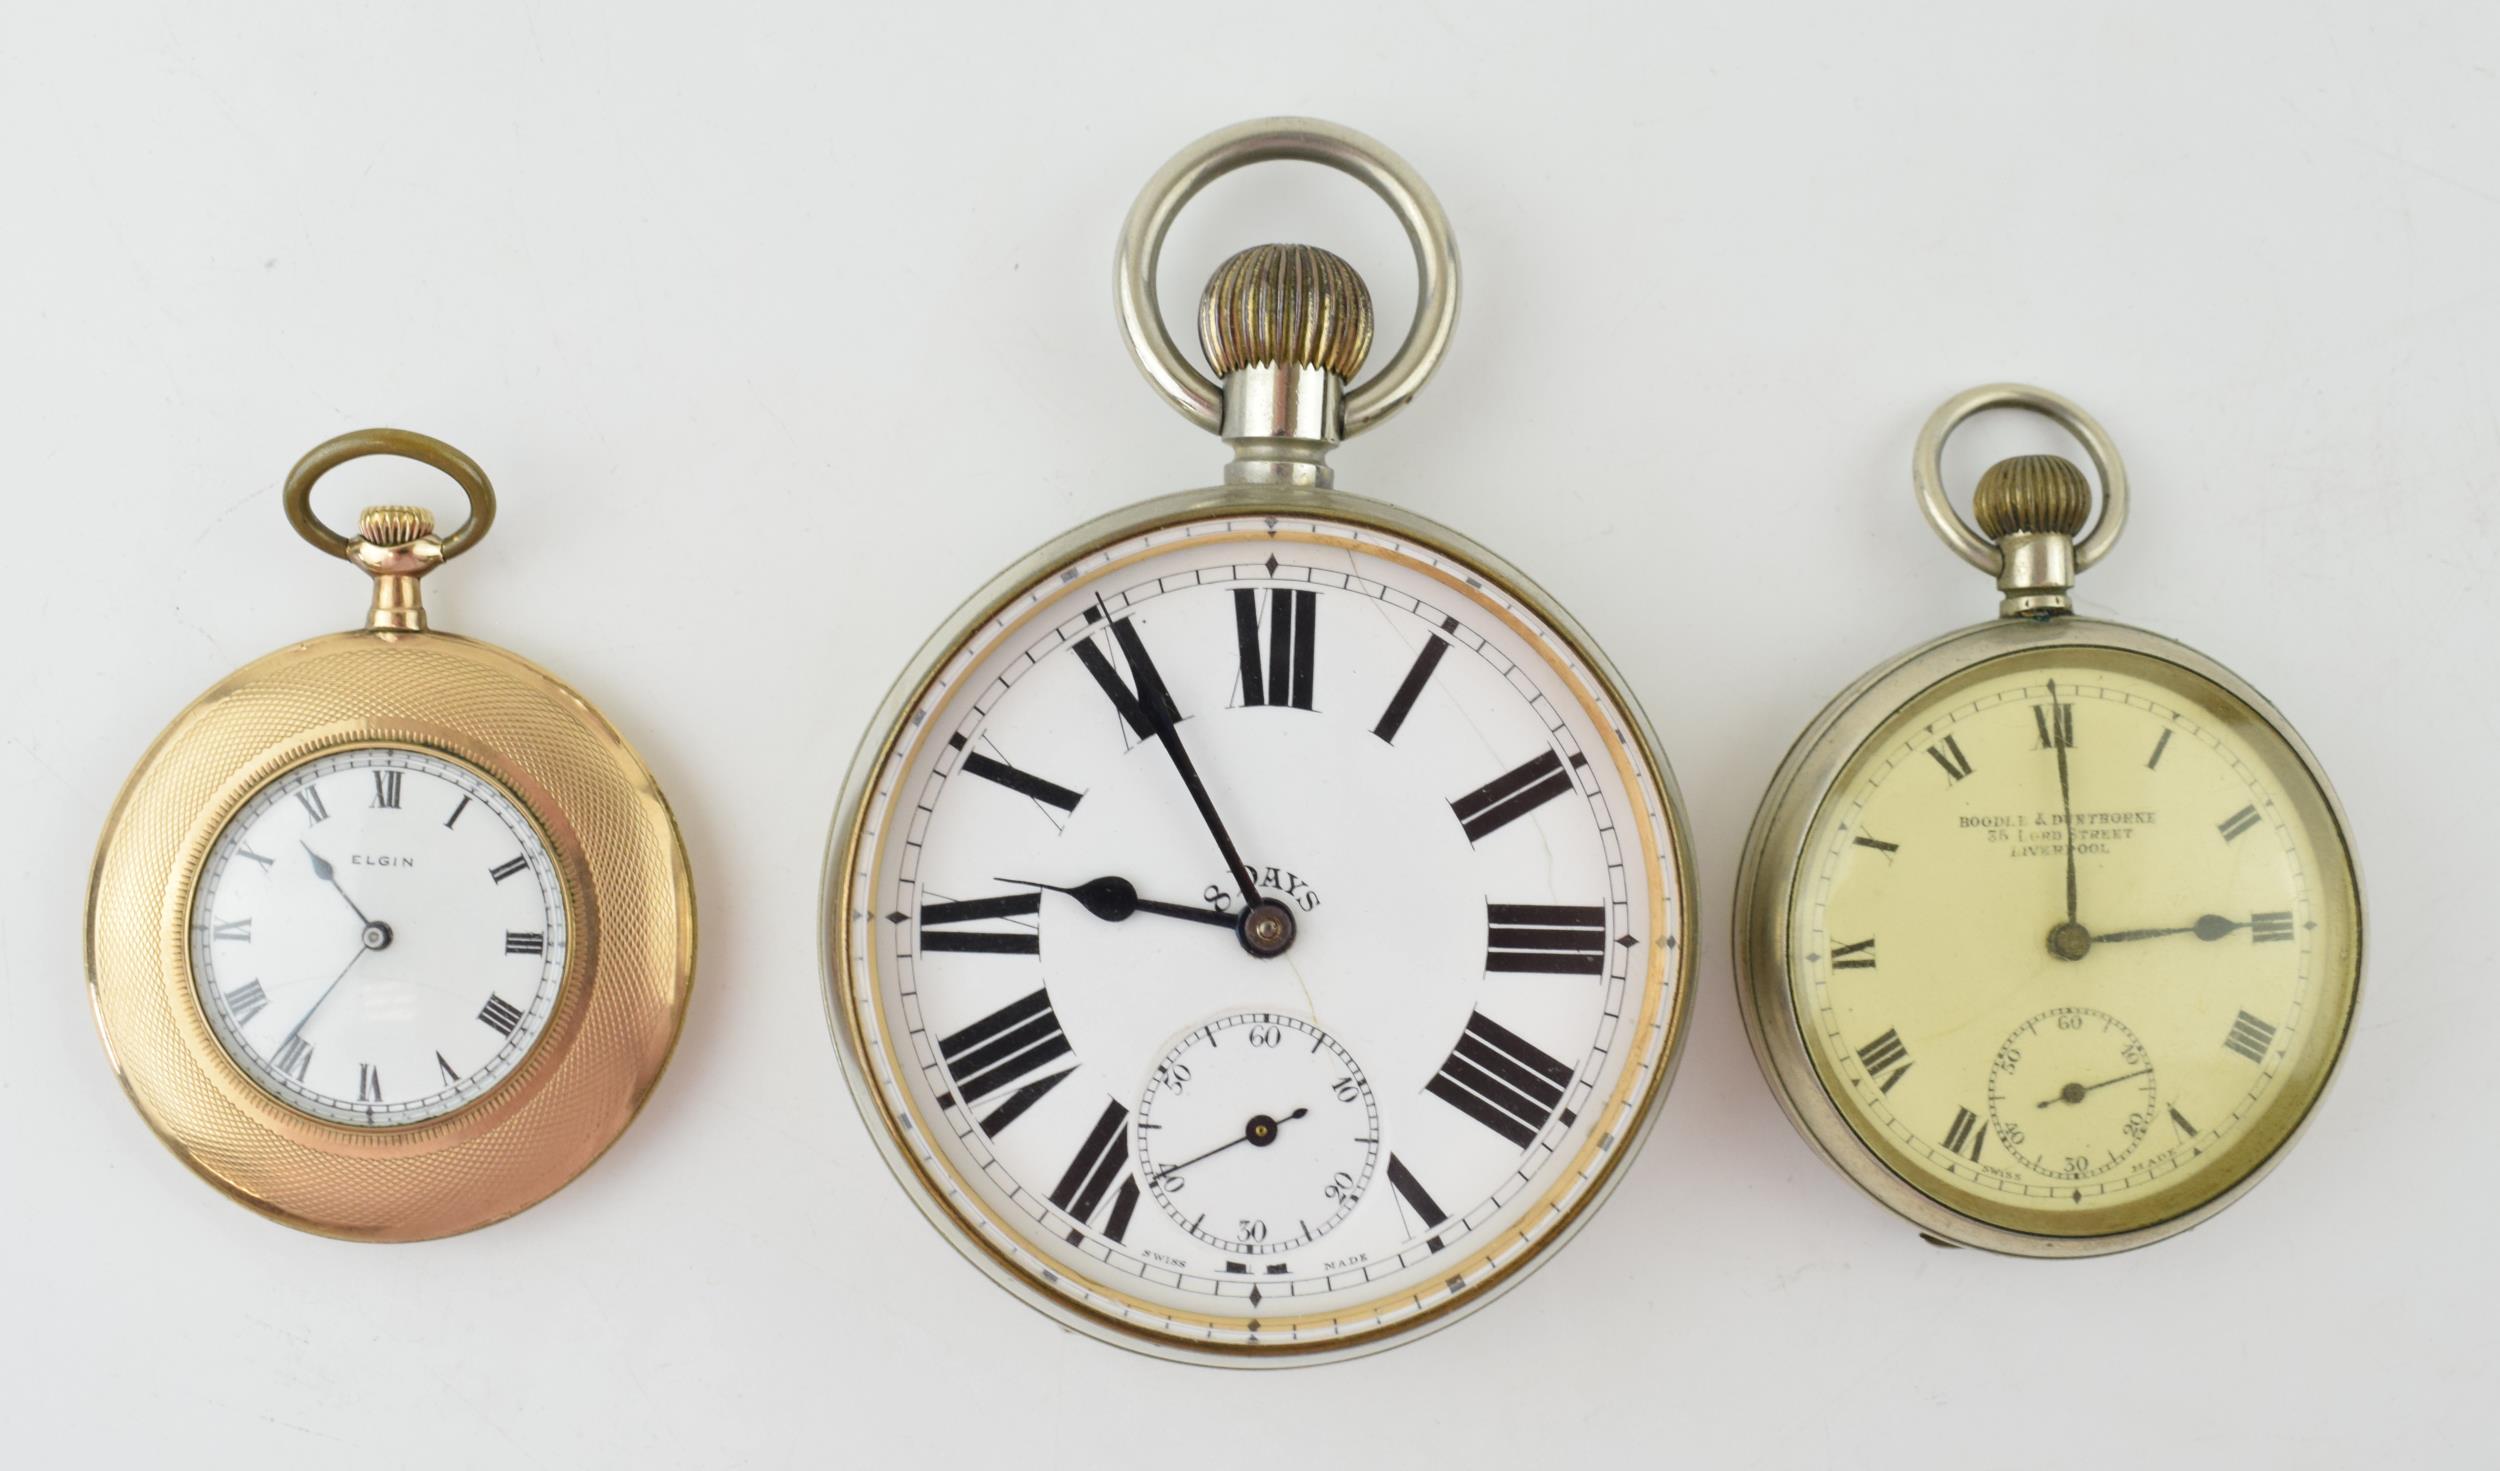 A collection of pocket watches to include a Goliath model with an 8 day Swiss movement, subsidiary